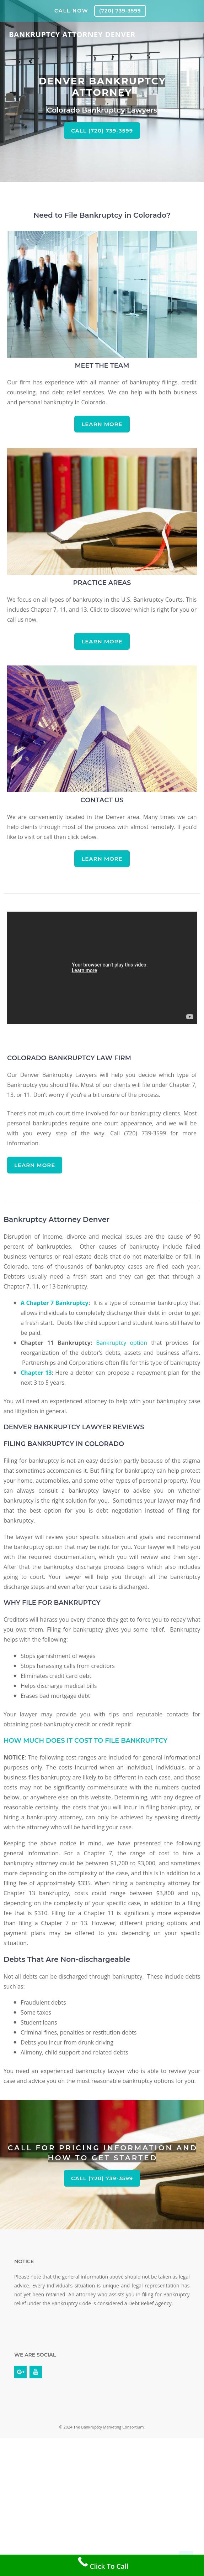 Denver Bankruptcy Lawyer - Lone Tree CO Lawyers